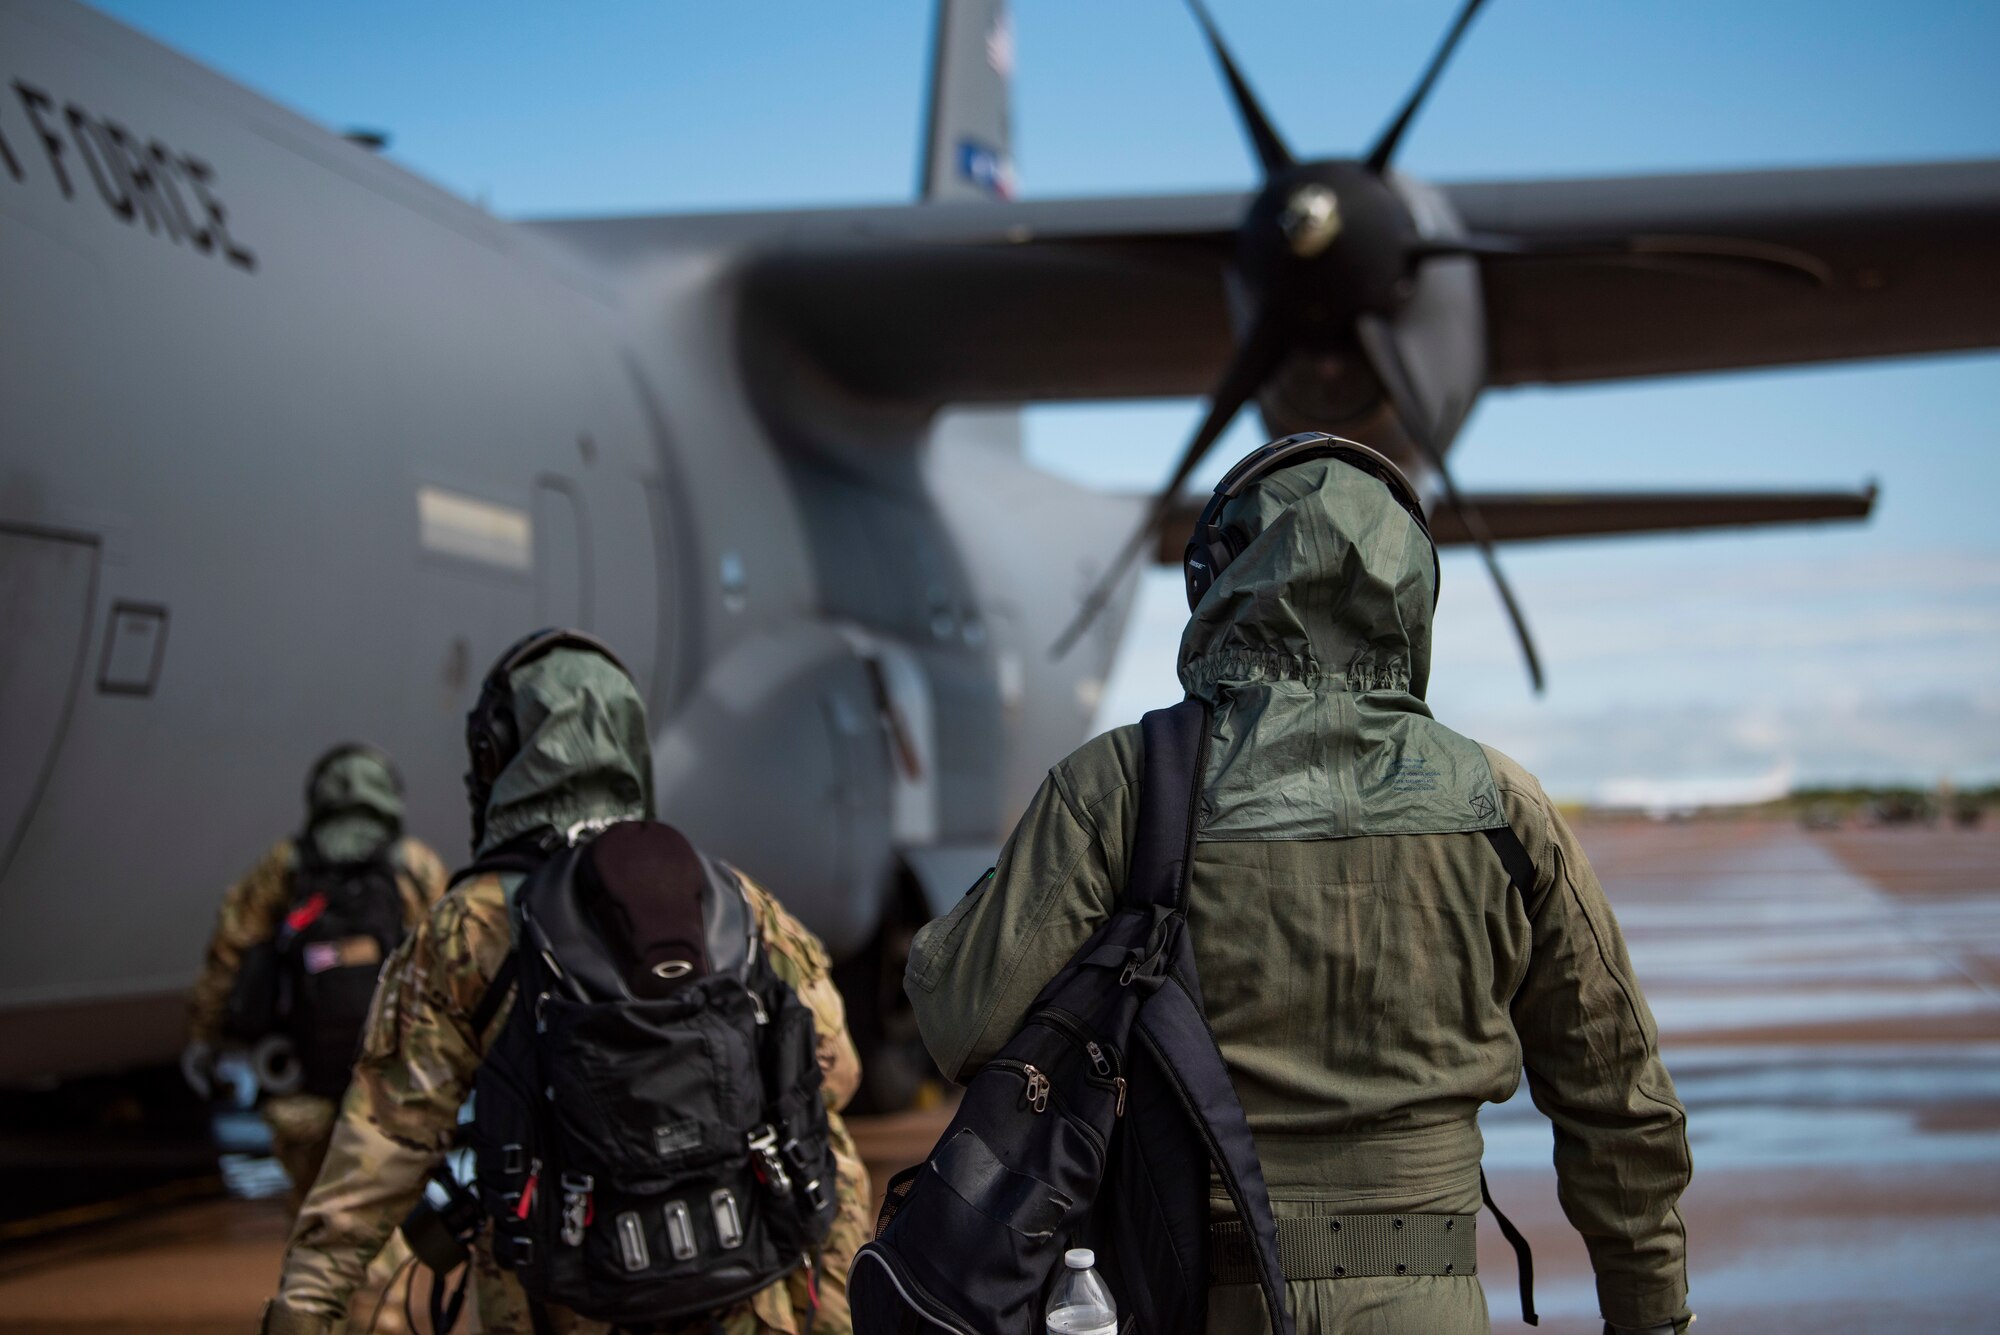 1st Lt. Coltan Nading, 40th Airlift Squadron pilot, right, Capt. Miranda Mila, 40th AS pilot, center, and Staff Sgt. Tristan Geray, 40th AS loadmaster, approach a C-130J Super Hercules at Dyess Air Force Base, Texas, June 2,2021. The aircrew simulated aircraft preflight checks and conducted a ground egress in order to field test the new Two-Piece Undergarment chemical suit. (U.S. Air Force photo by Airman 1st Class Colin Hollowell)